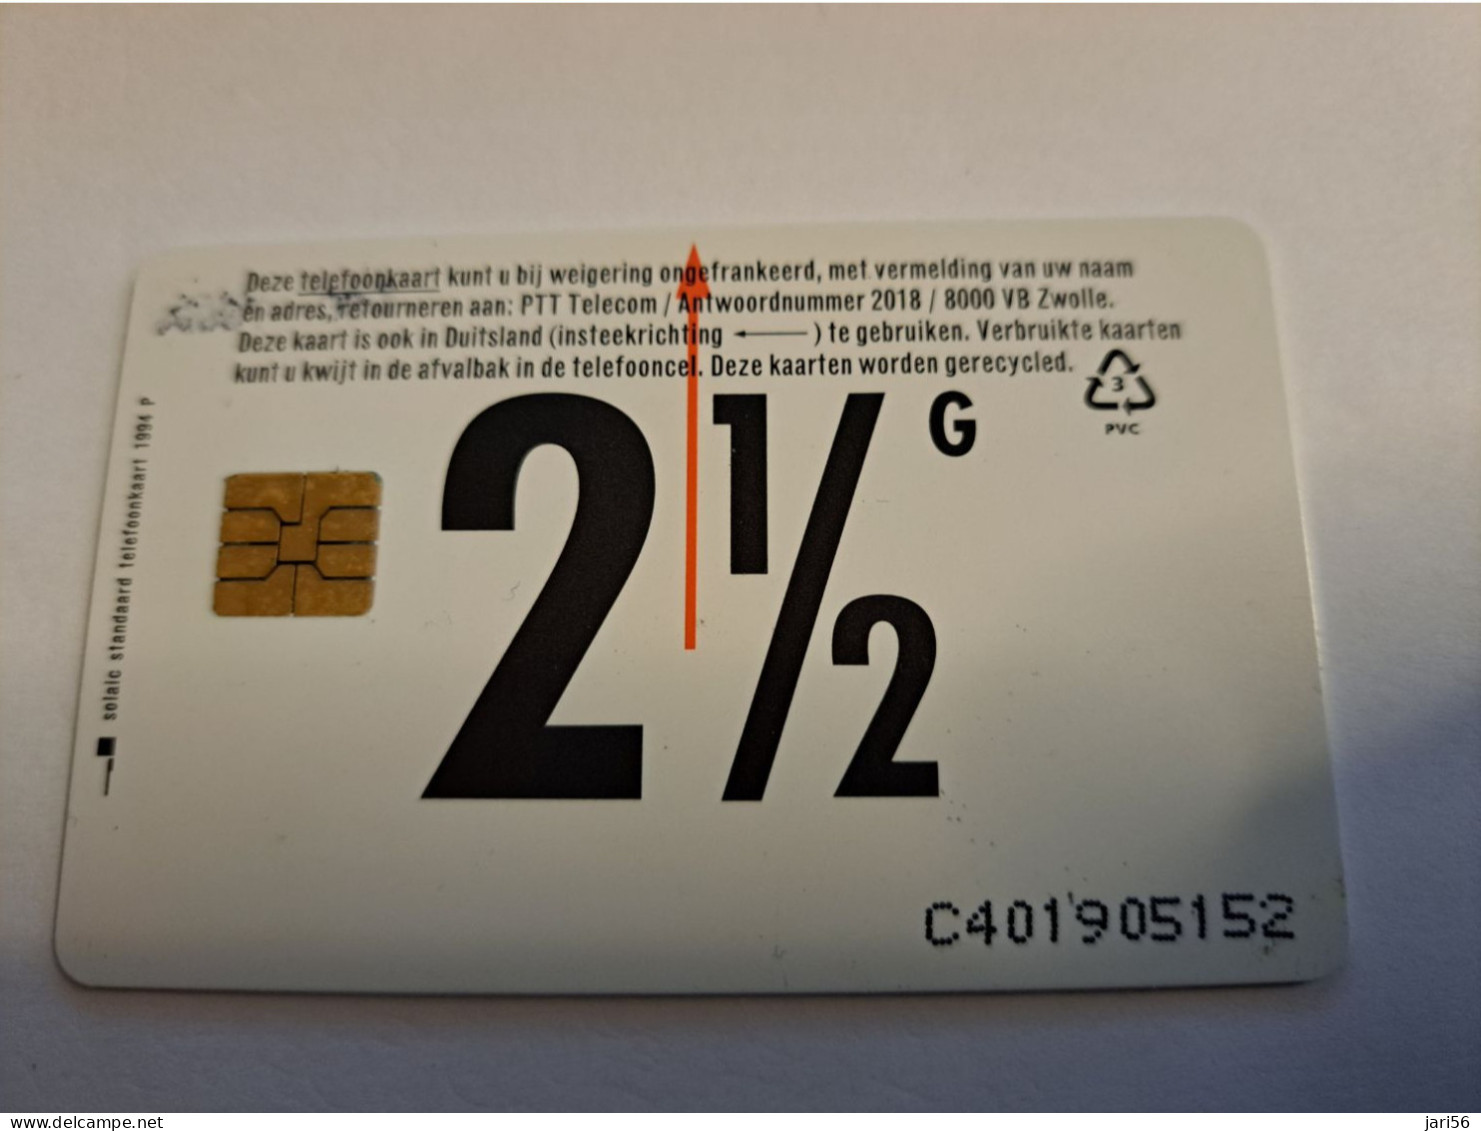 NETHERLANDS / FL 2,50 - CHIP CARD / CRDE 021 HERMAN BROOD  ONLY 1000X    / PRIVATE  MINT  ** 15927** - [3] Sim Cards, Prepaid & Refills